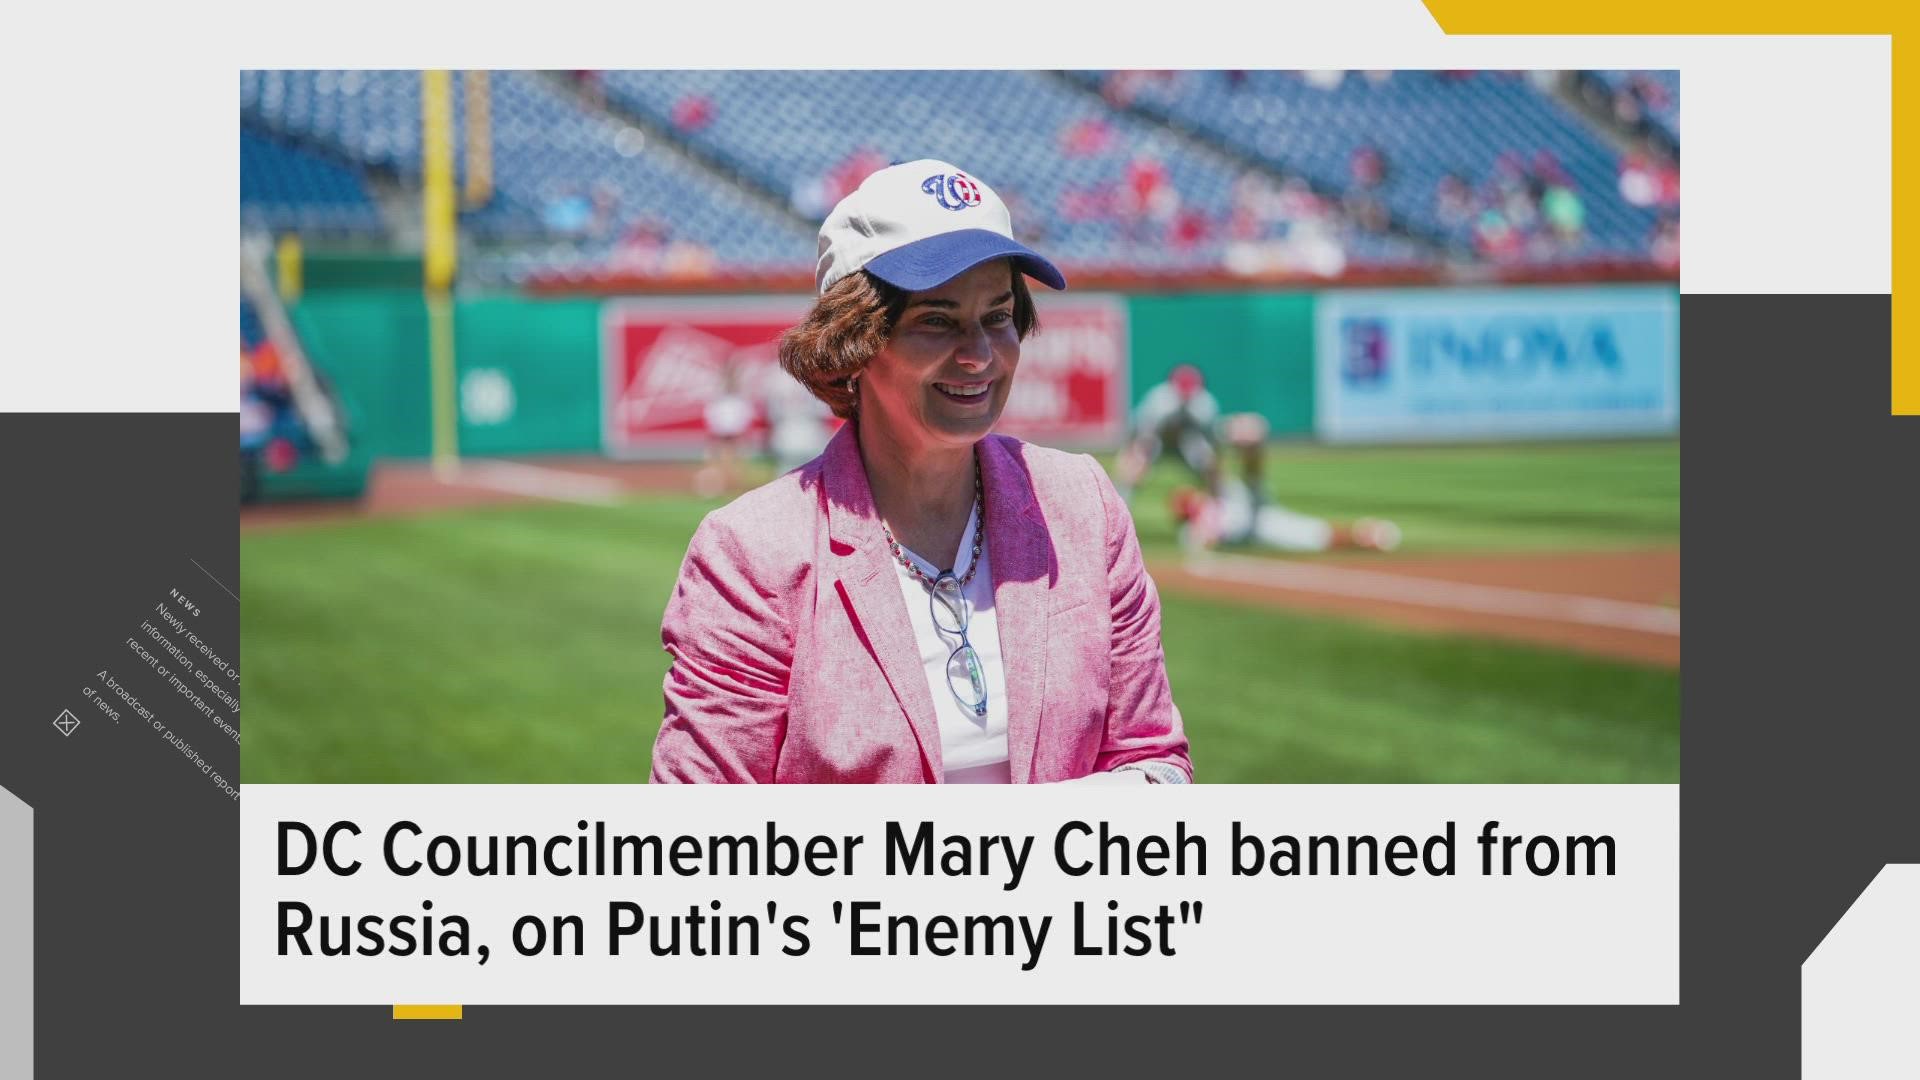 D.C. Councilmember Mary Cheh has been banned from Russia and is now on Putin's 'Enemy List'